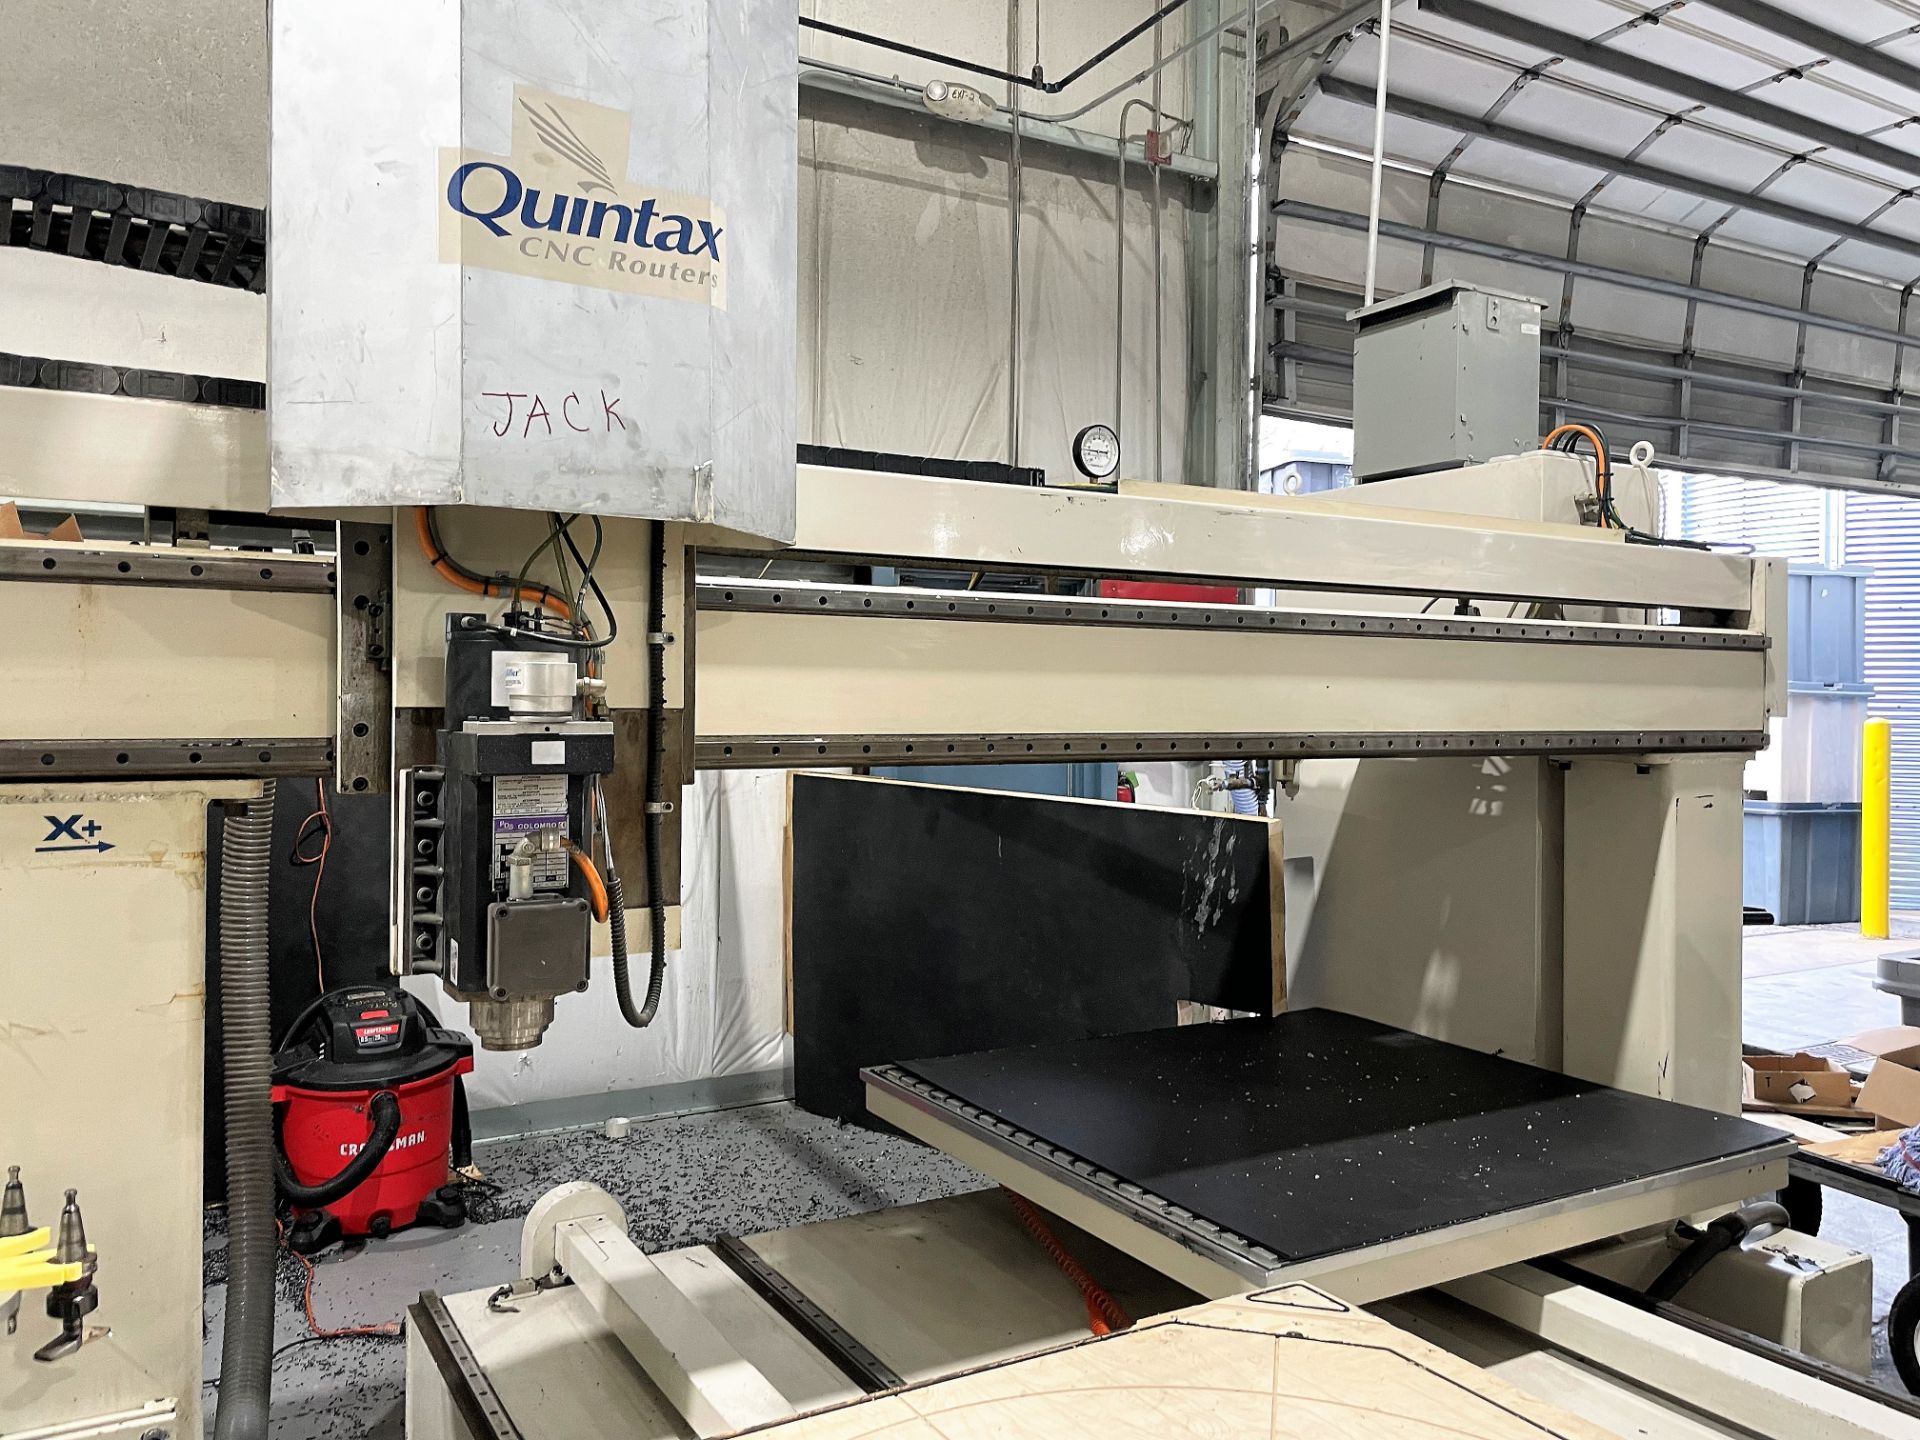 QUINTAX Q3M 3-AXIS DUAL 5X5 TABLE CNC ROUTER, S/N 0-1123, NEW 2009 - Image 6 of 10